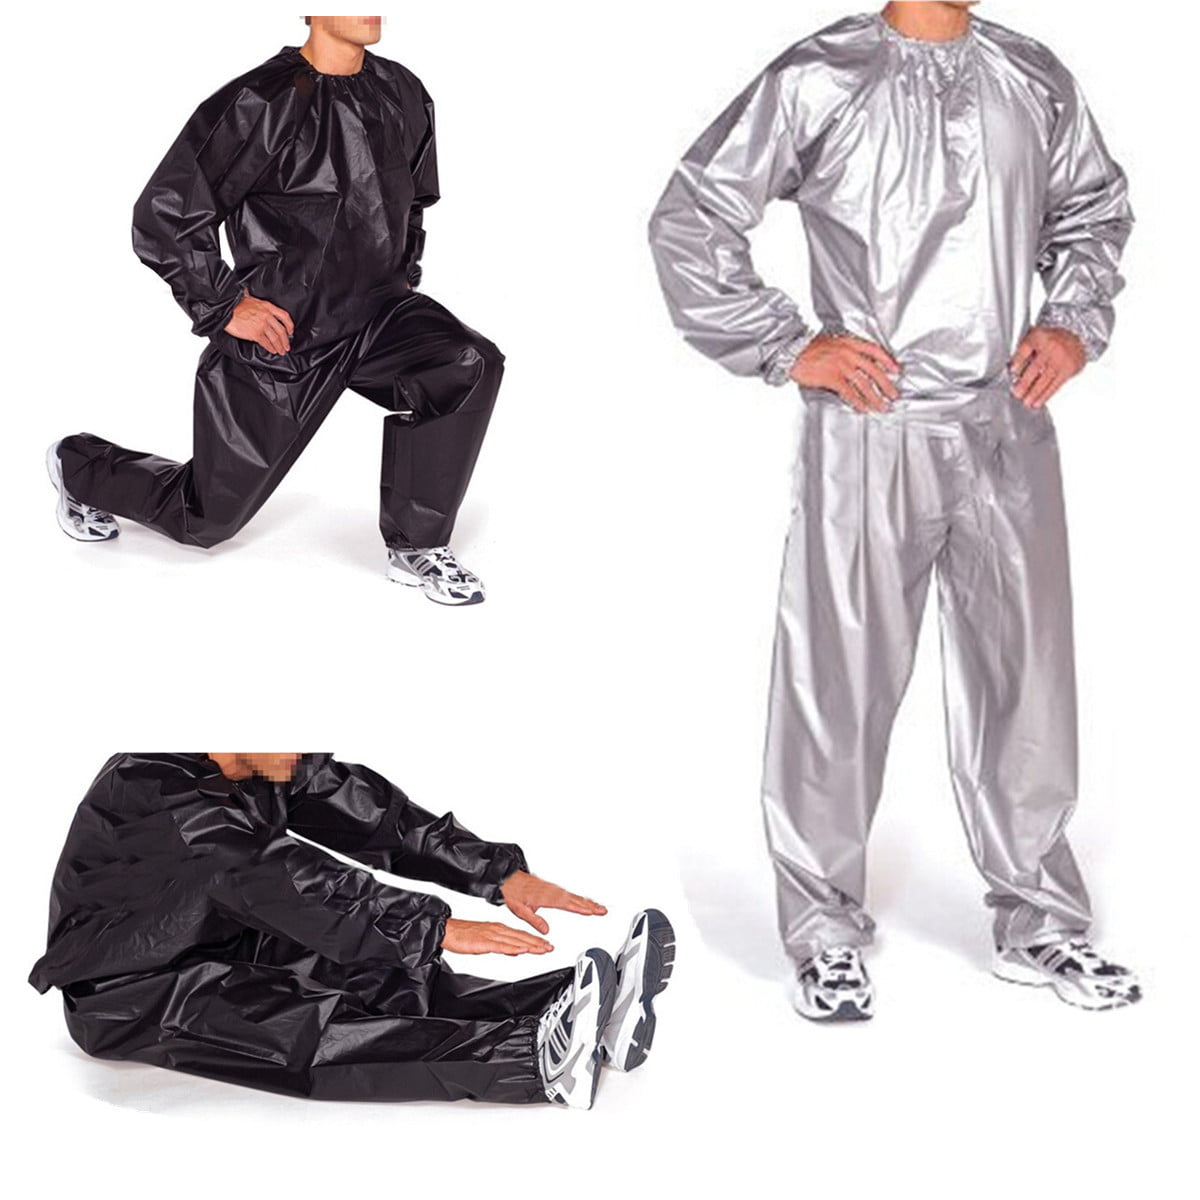 Gold's Gym L/xl Weight Loss Sweat Slimming Fitness Exercise Diet Sauna Suit for sale online